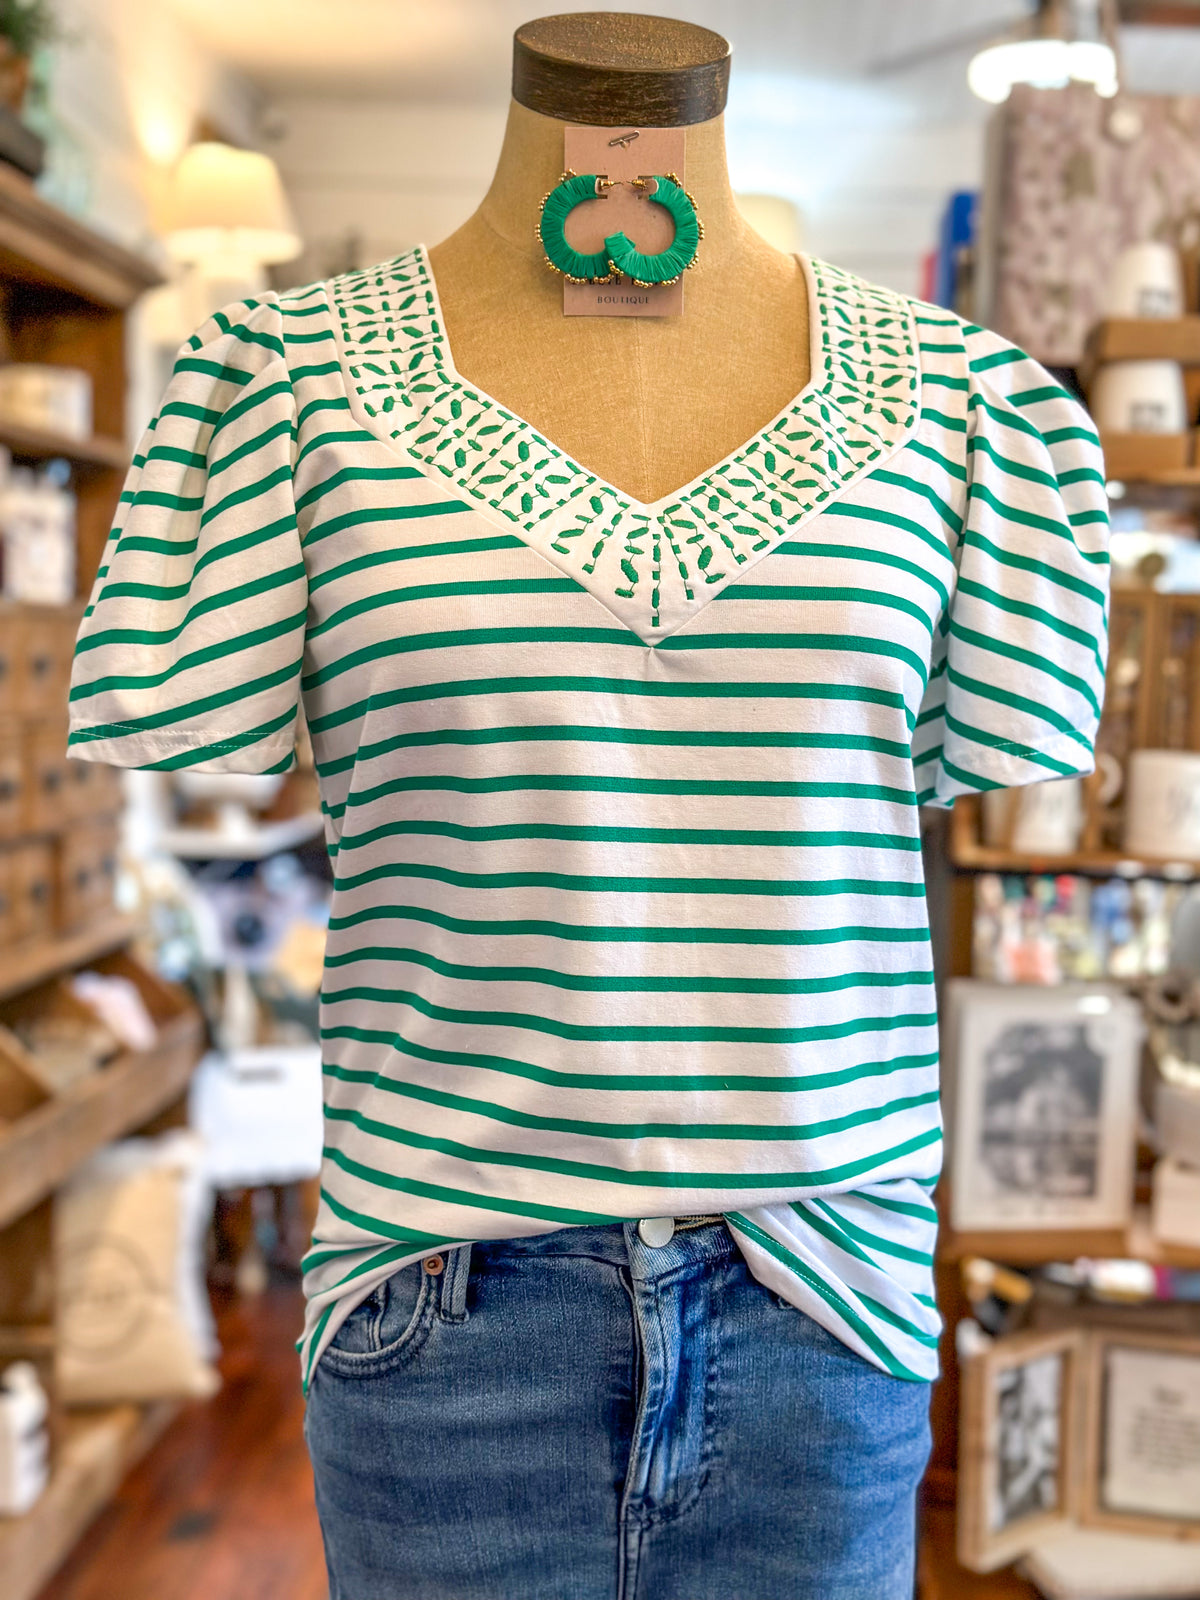 green and white stripe top with embroidery detail neckline washco